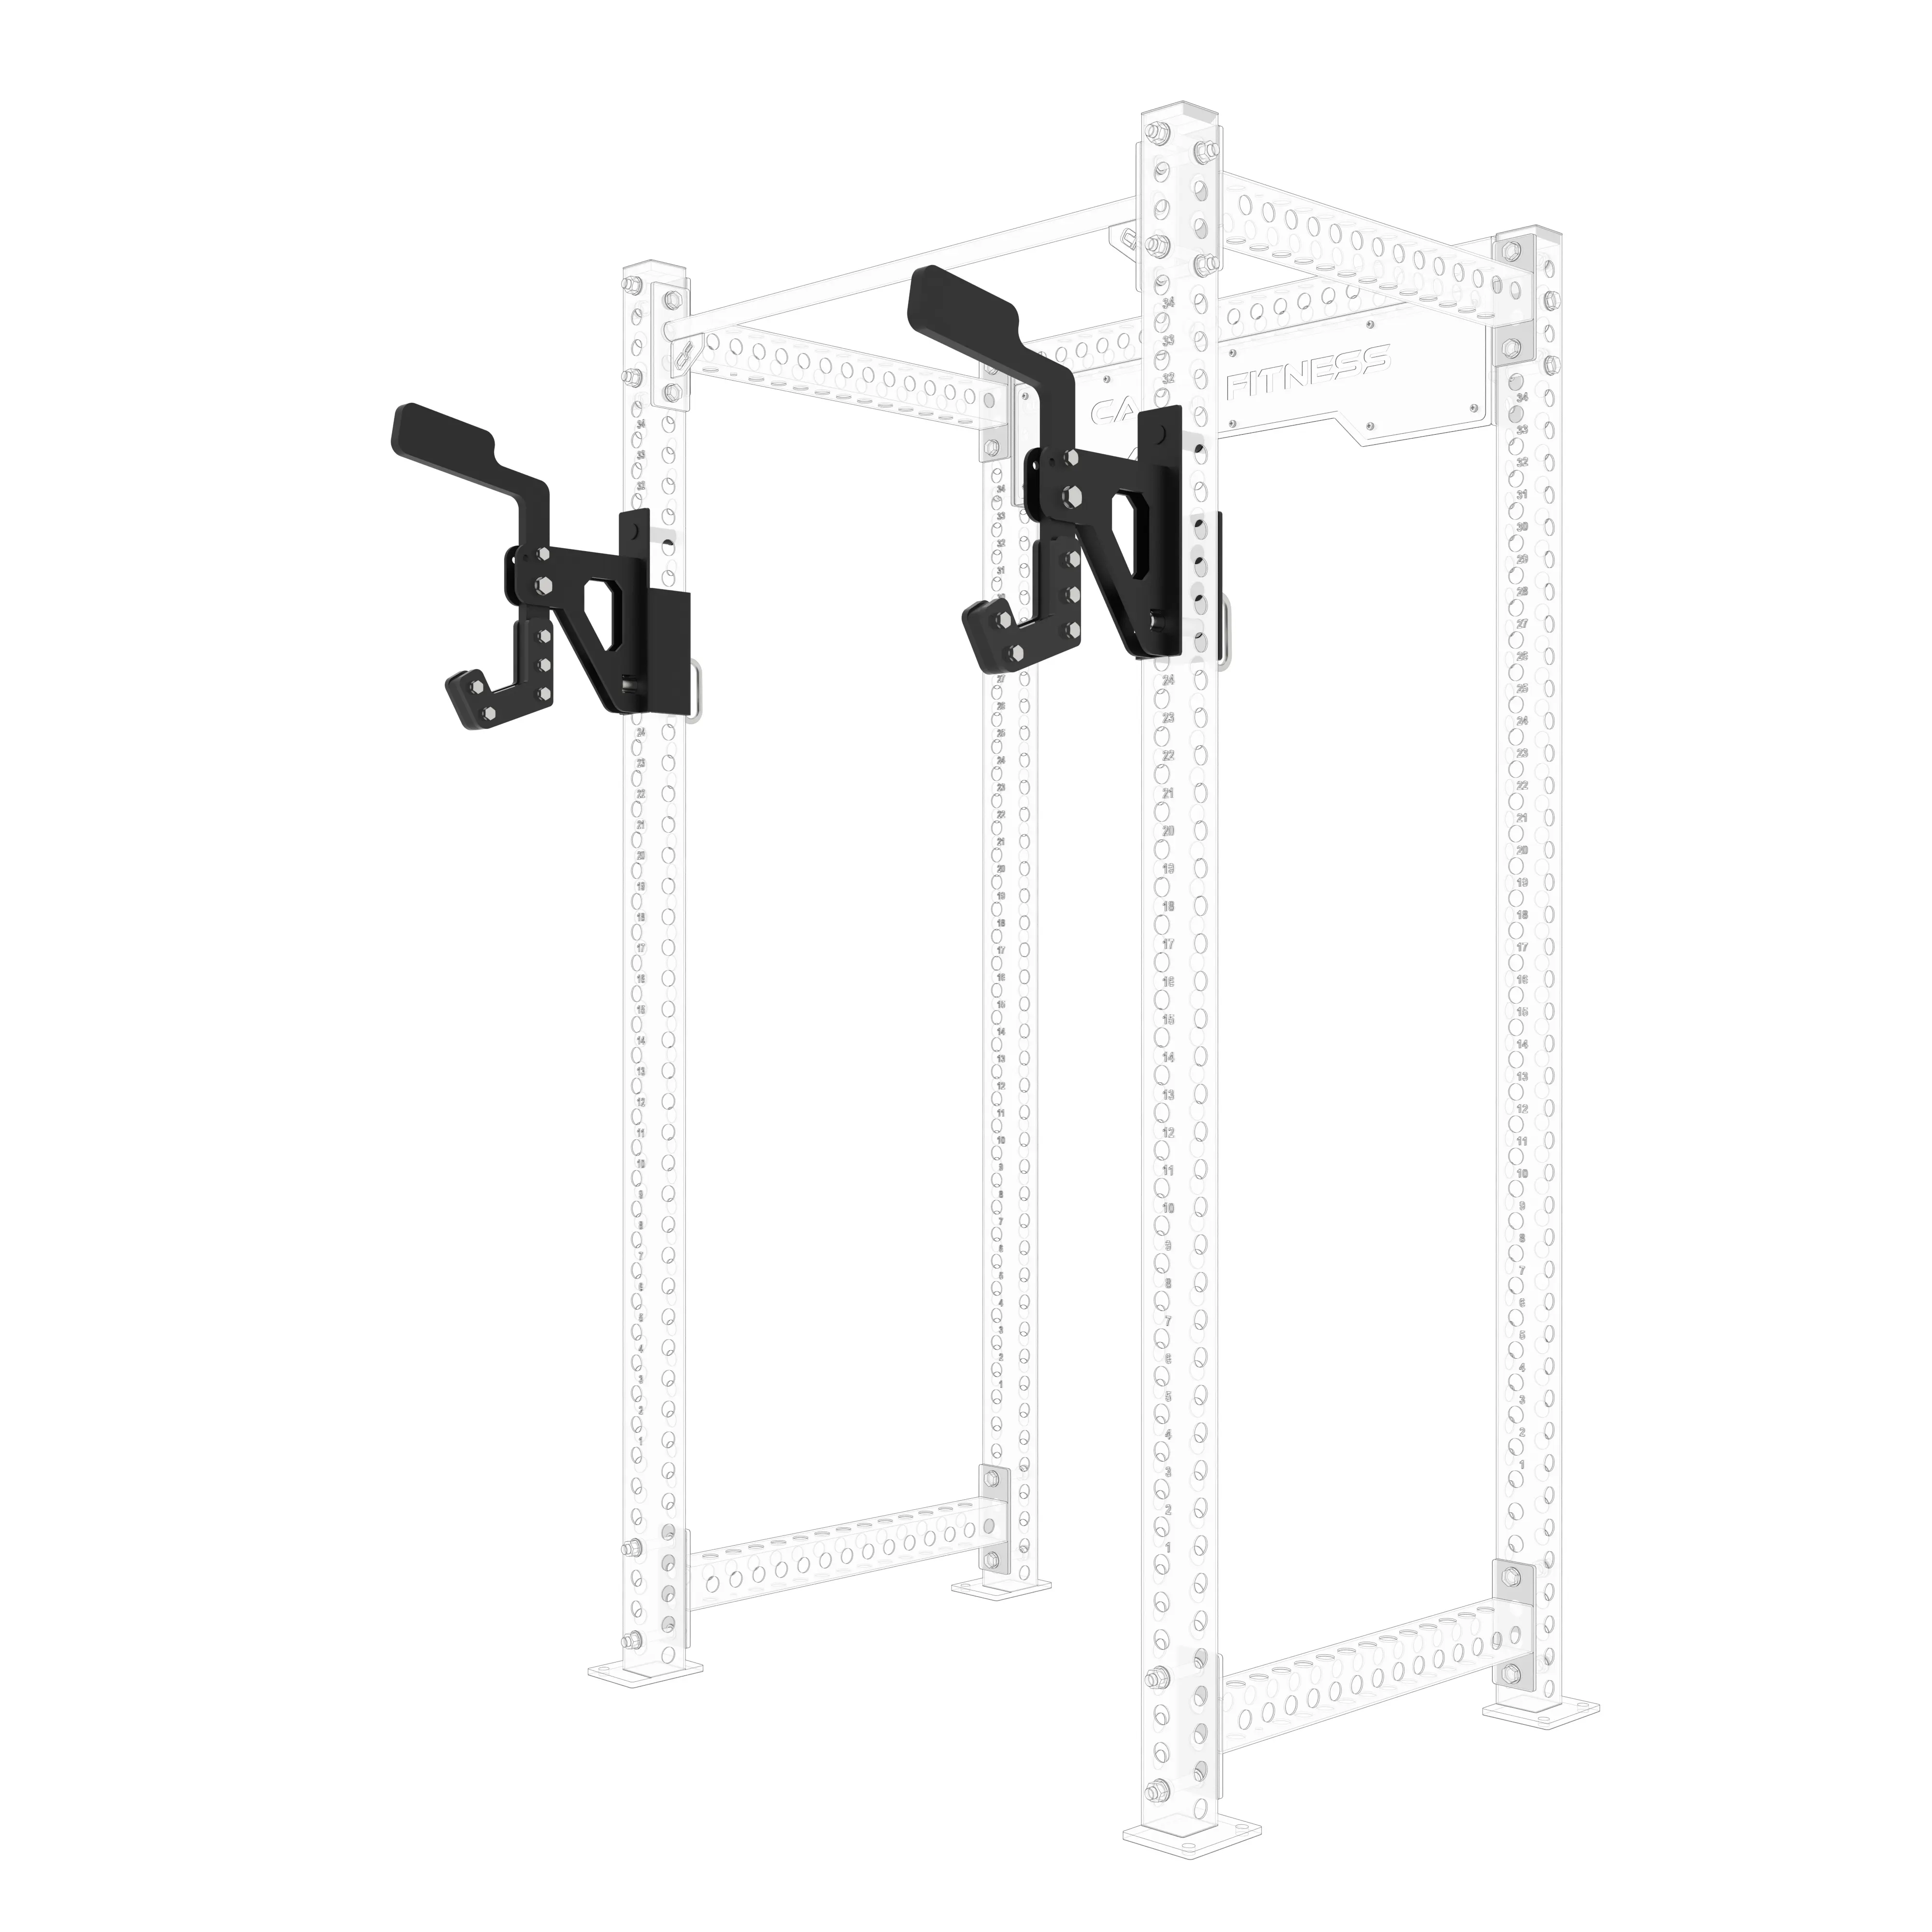 Hot Selling Adjustable Monolift Attachments Fit Professional Squat Rack Frame And Multi Power Rack Cage